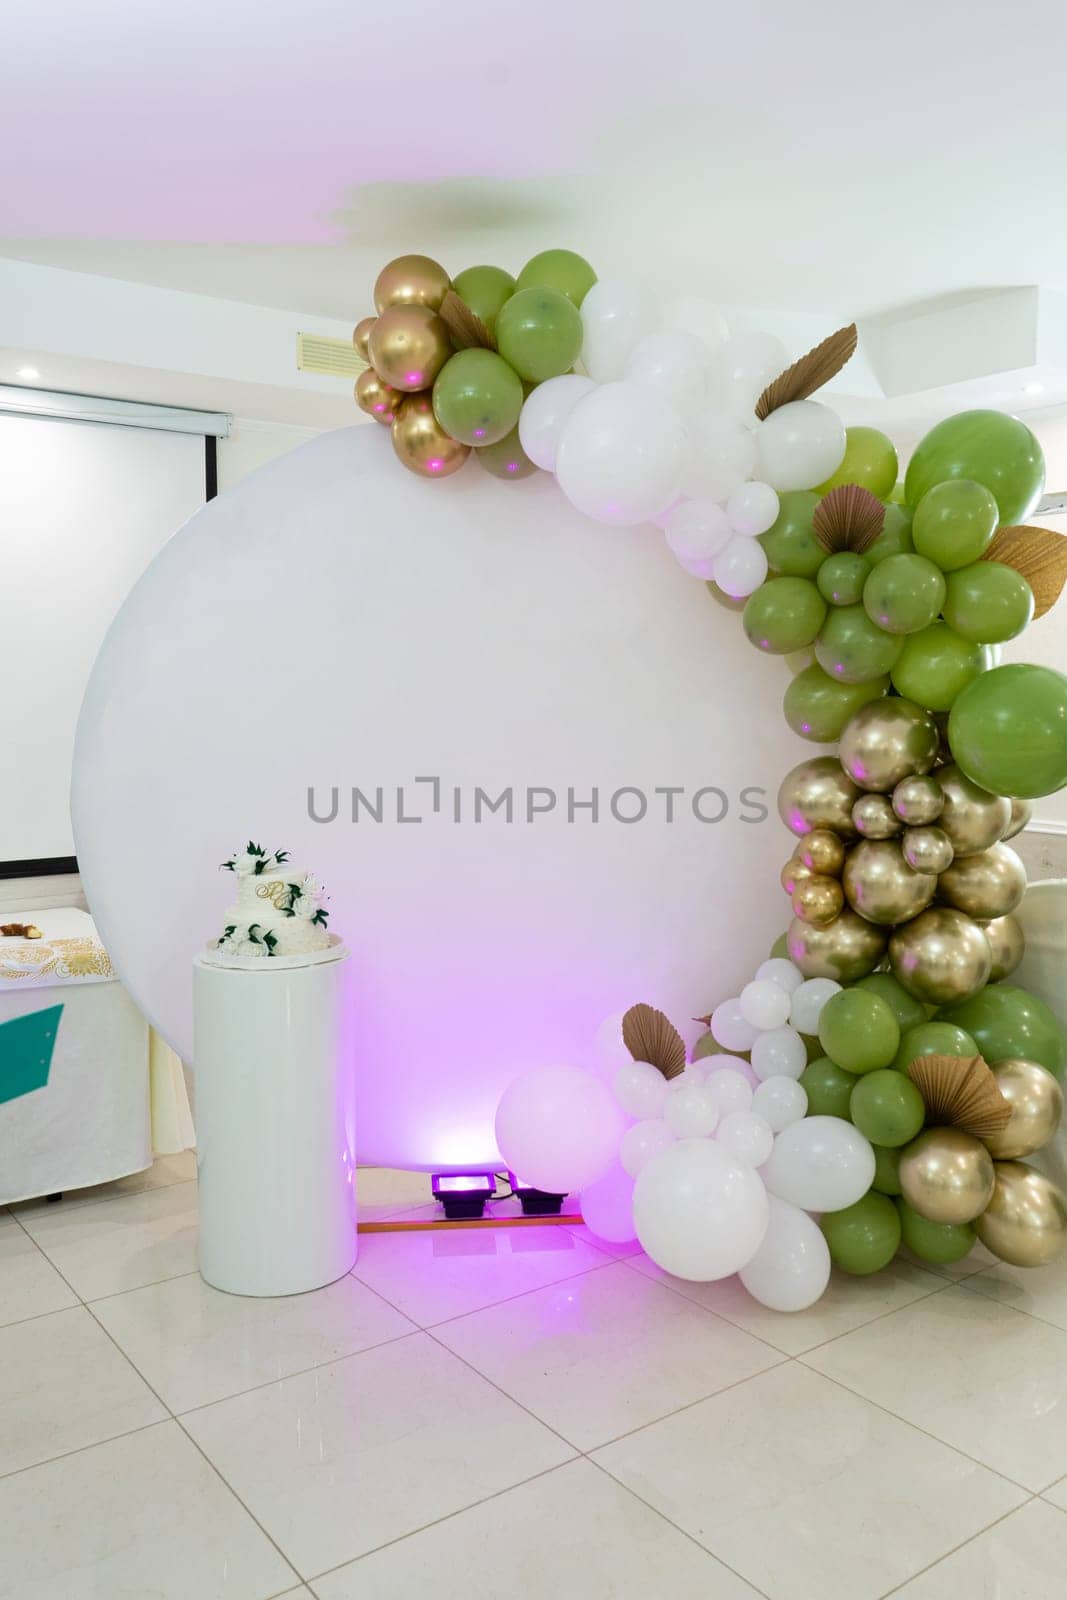 The white photo zone is decorated with balloons by Serhii_Voroshchuk